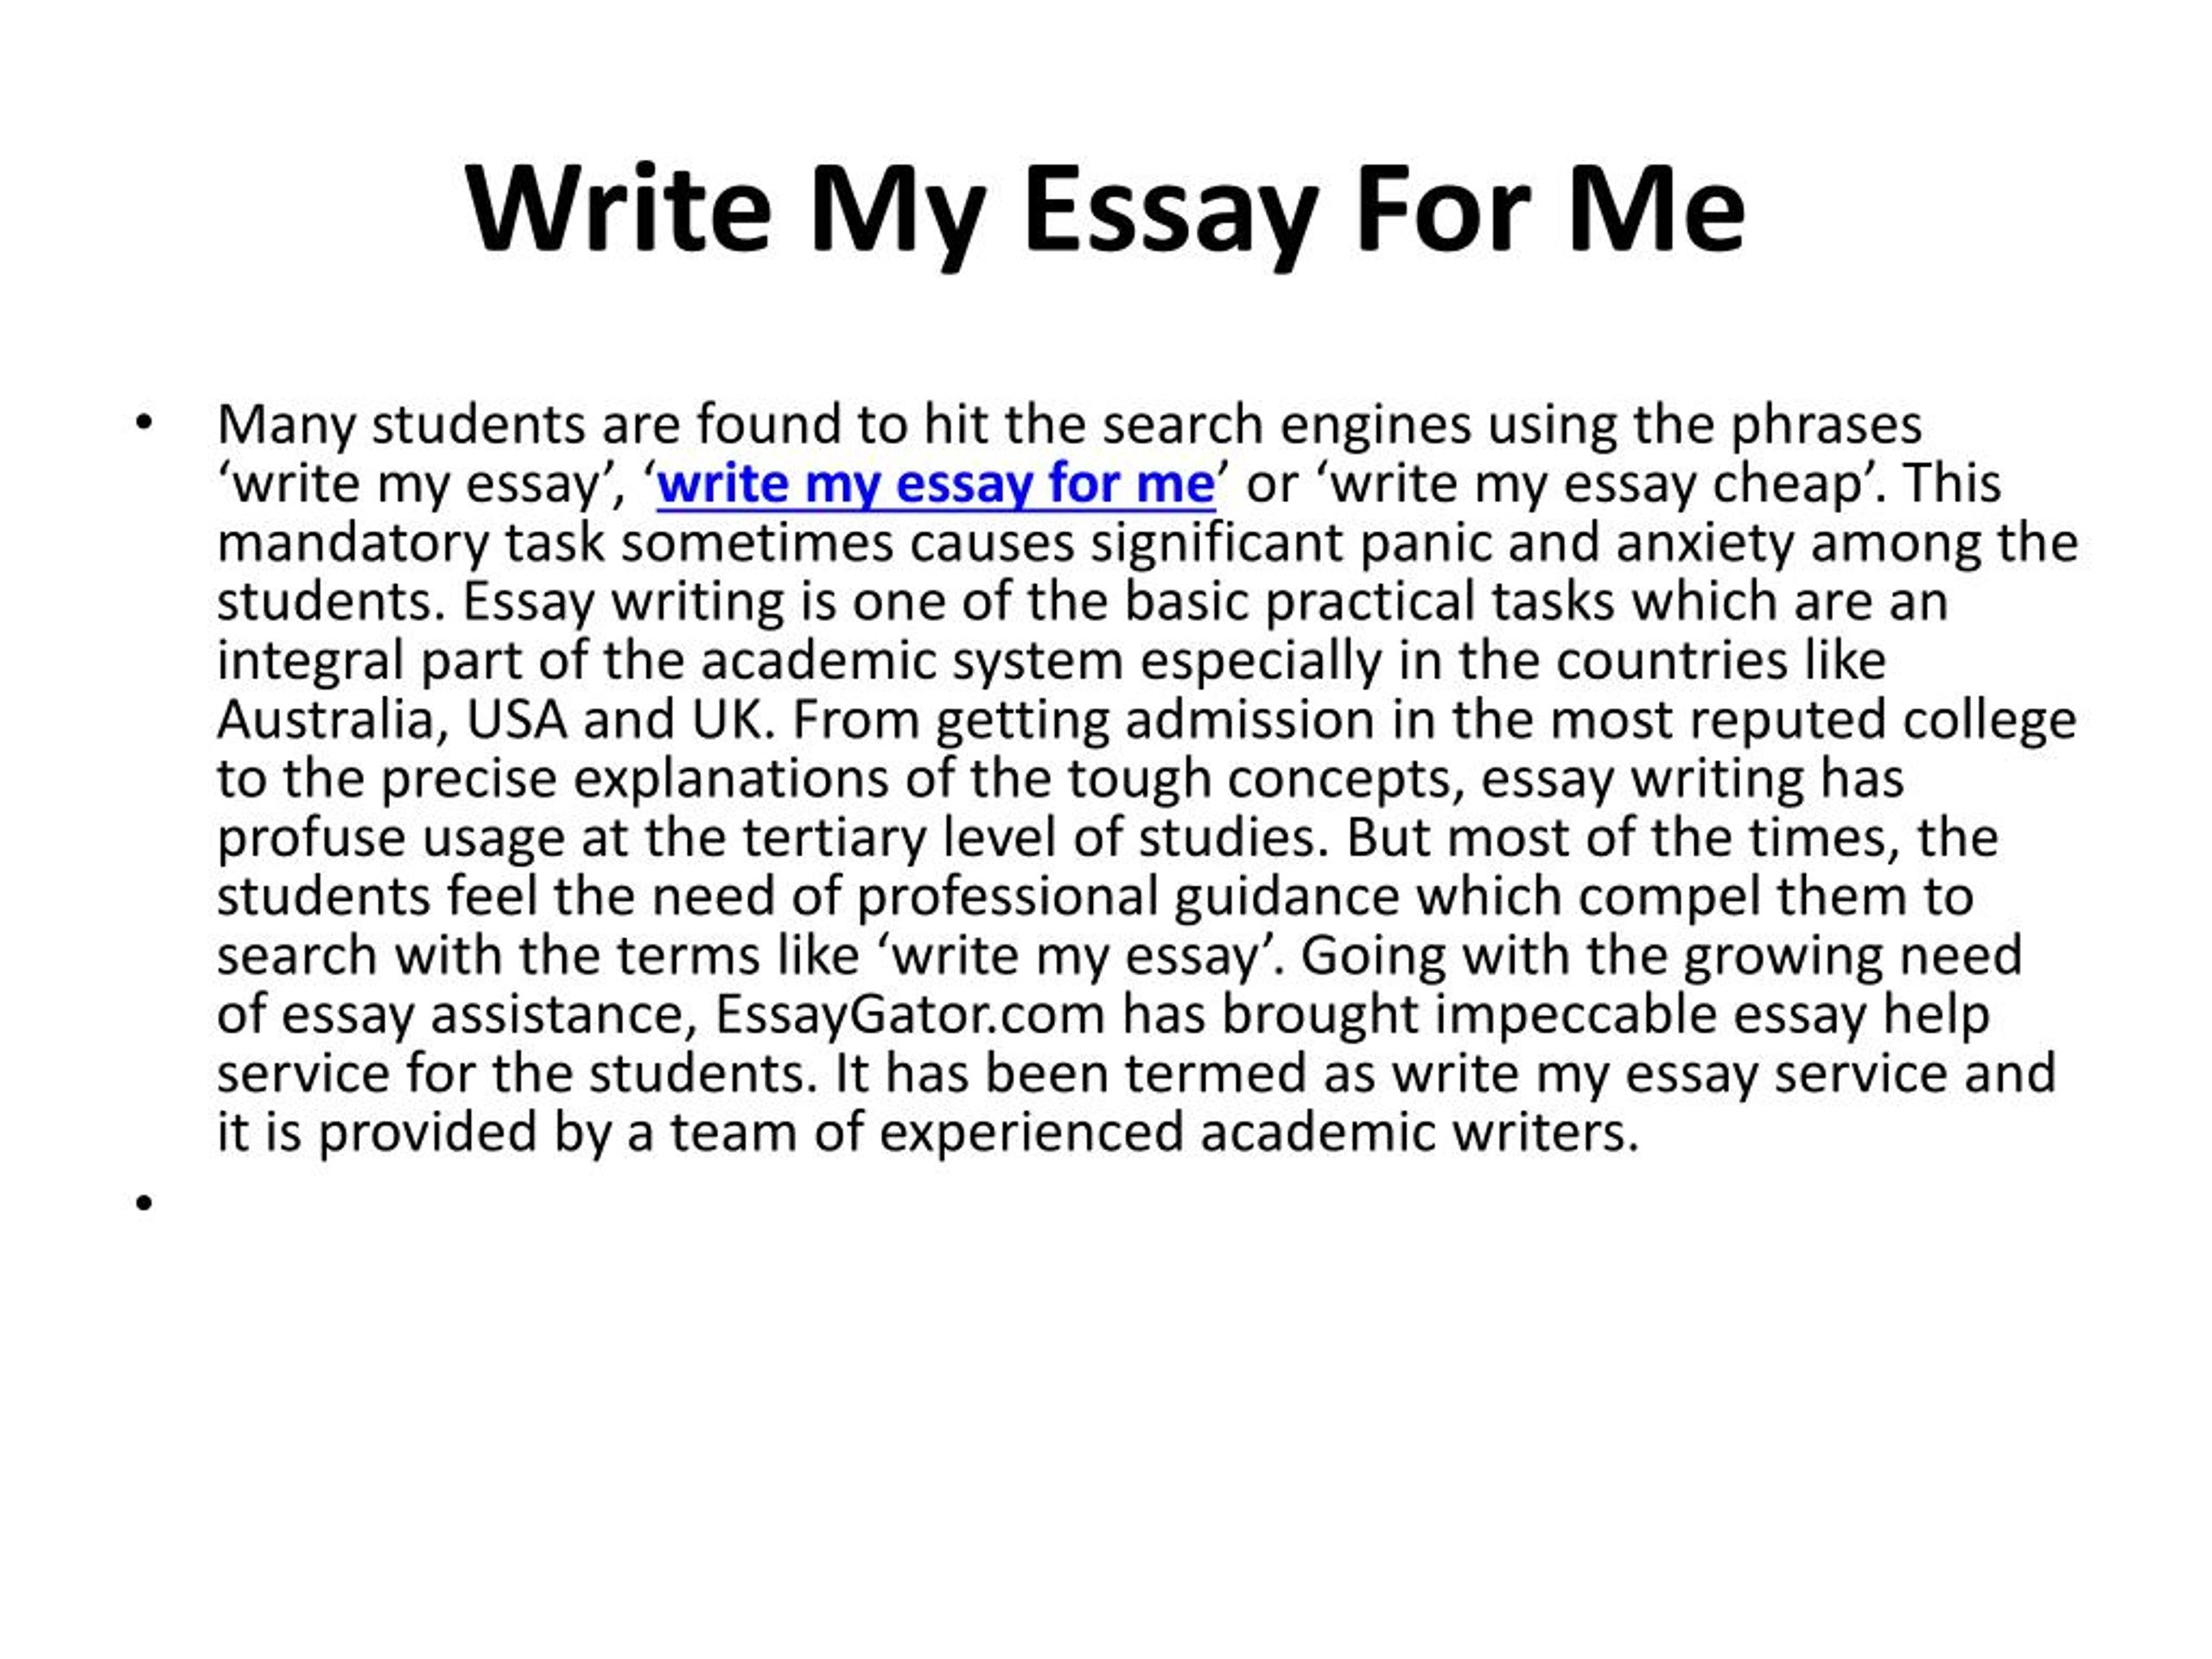 Sample of essay about my life